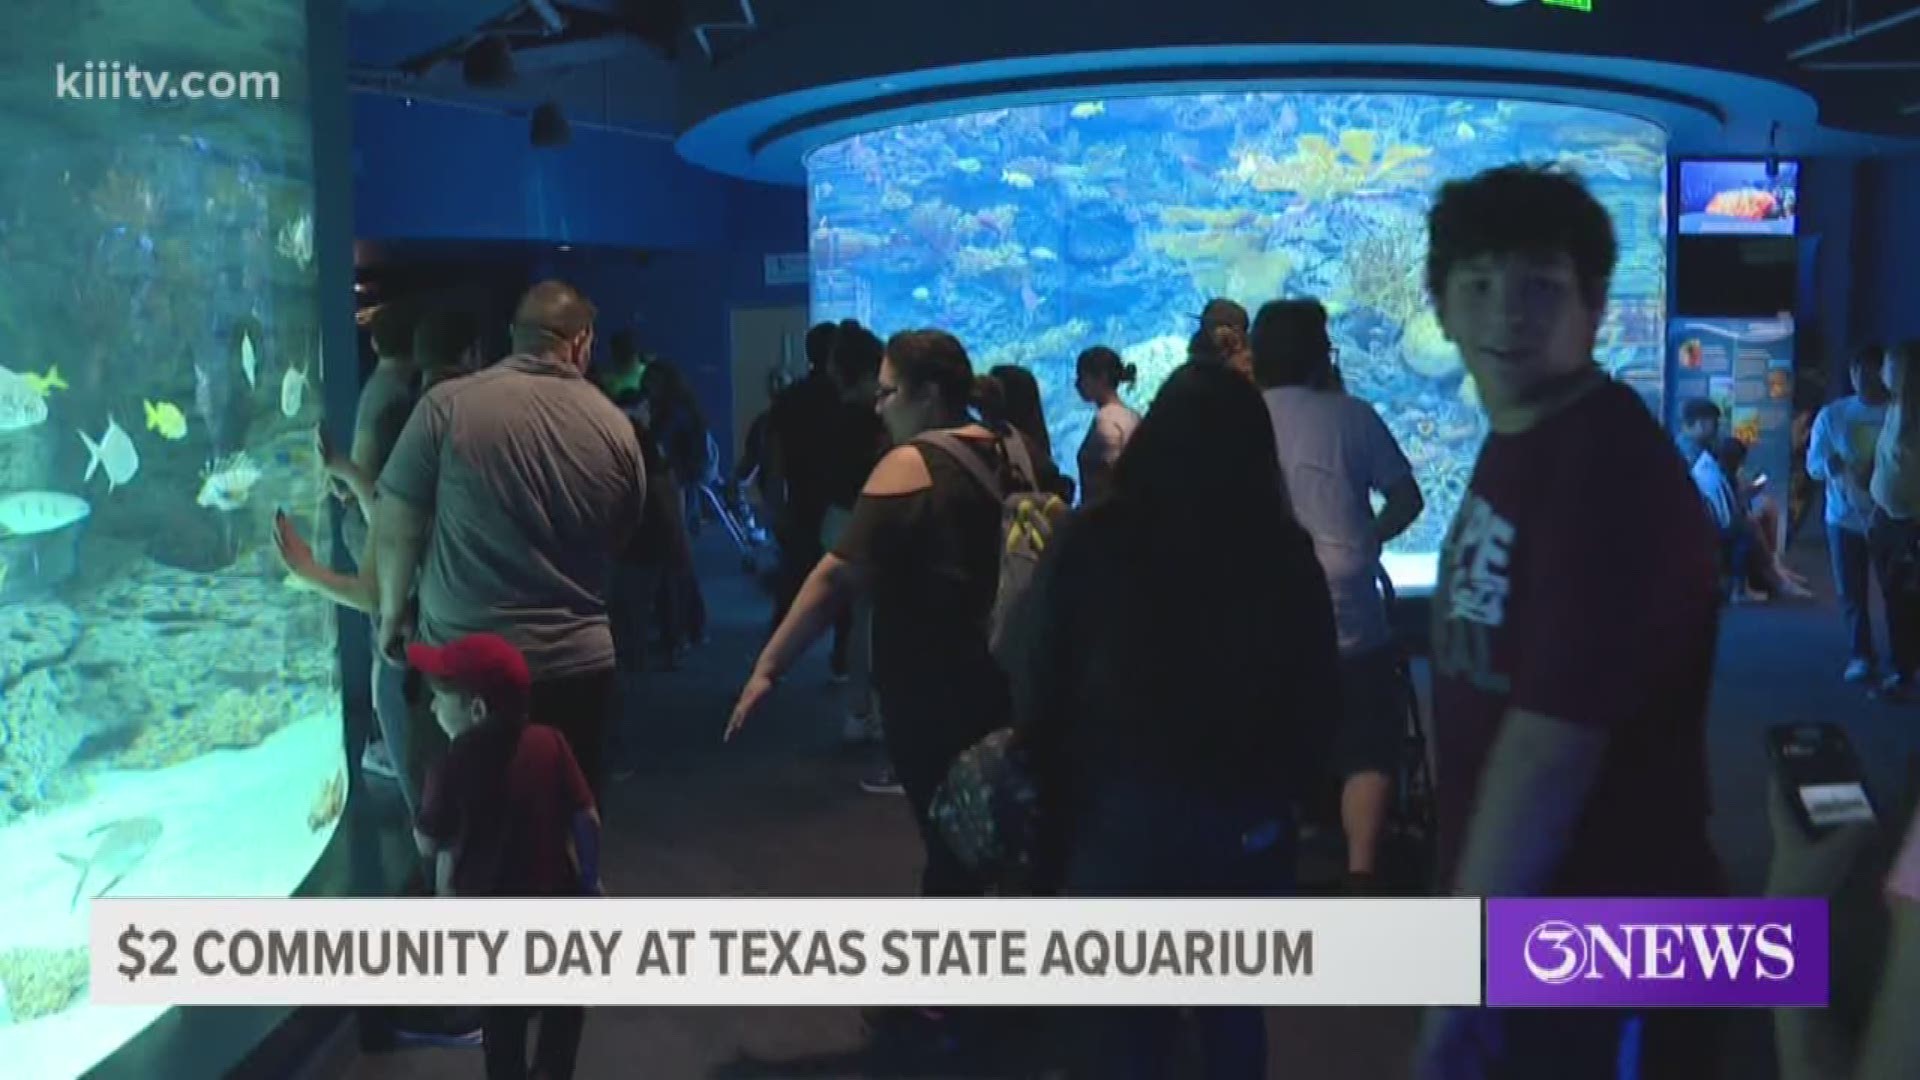 All the guest's admission money goes back to the aquarium's operations like animal care, staffing, and rescue programs.